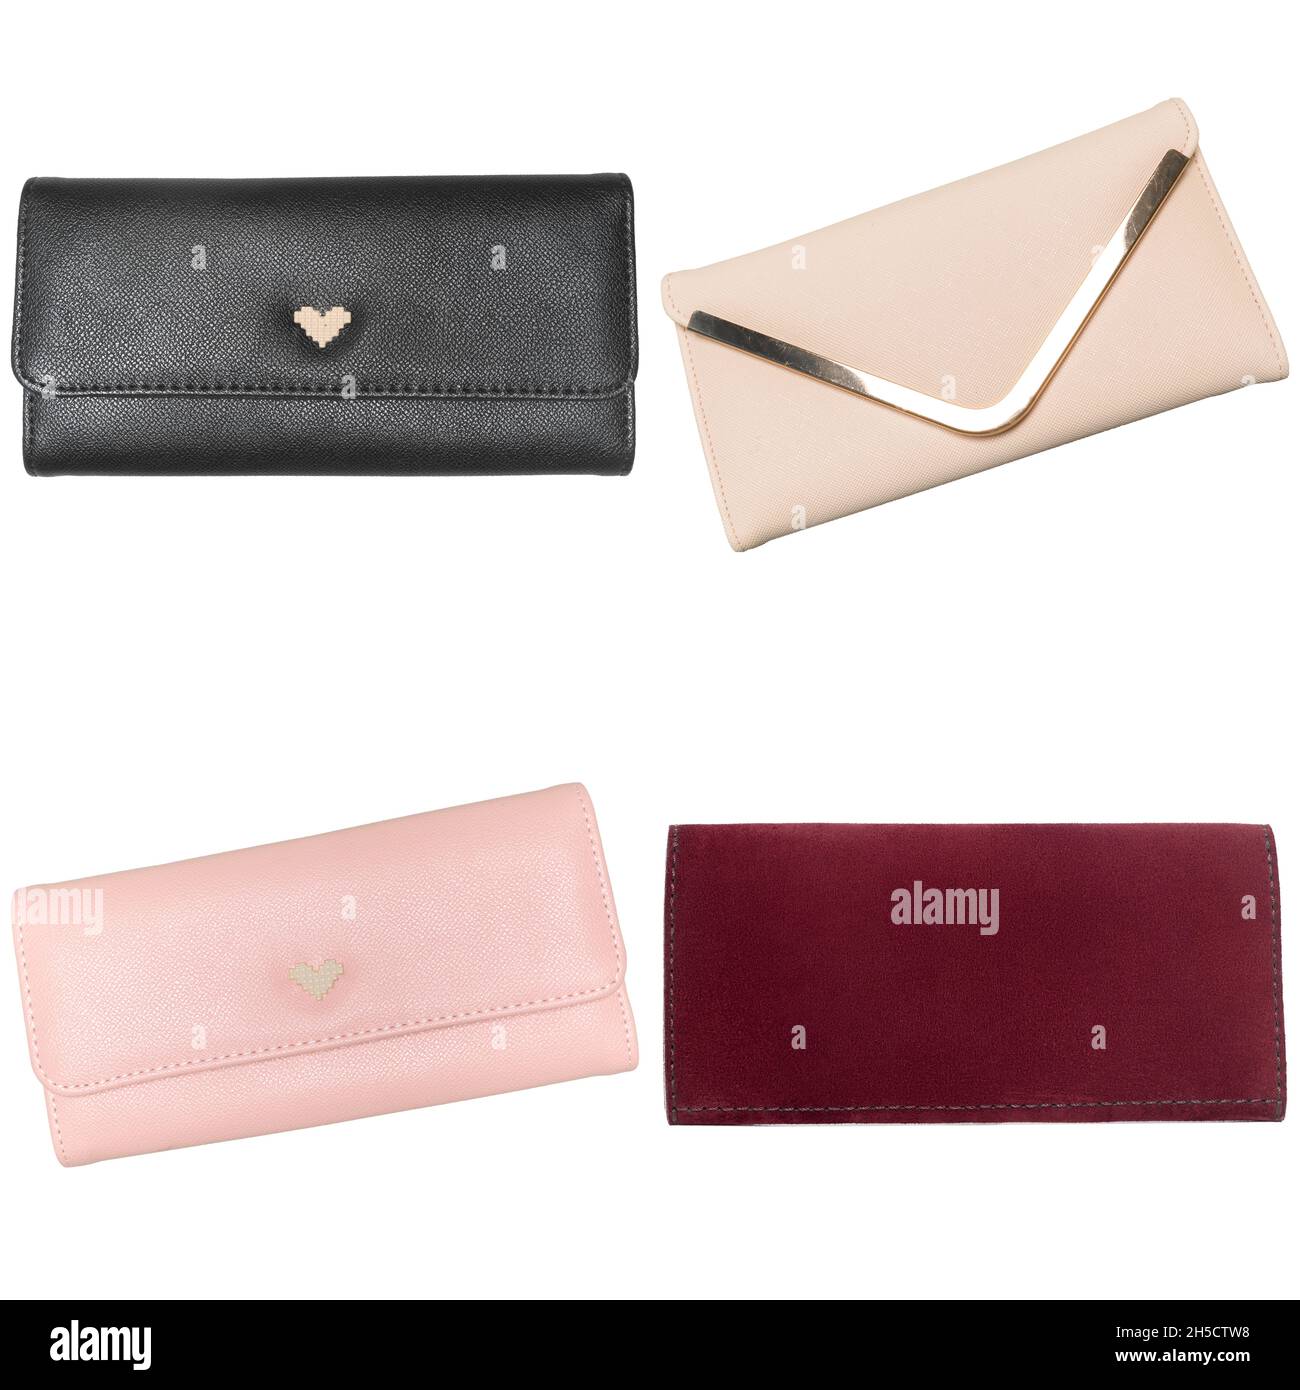 fcity.in - Pu Leather Women Mini Two Types Of Wallet Set Of 2front Designs  May